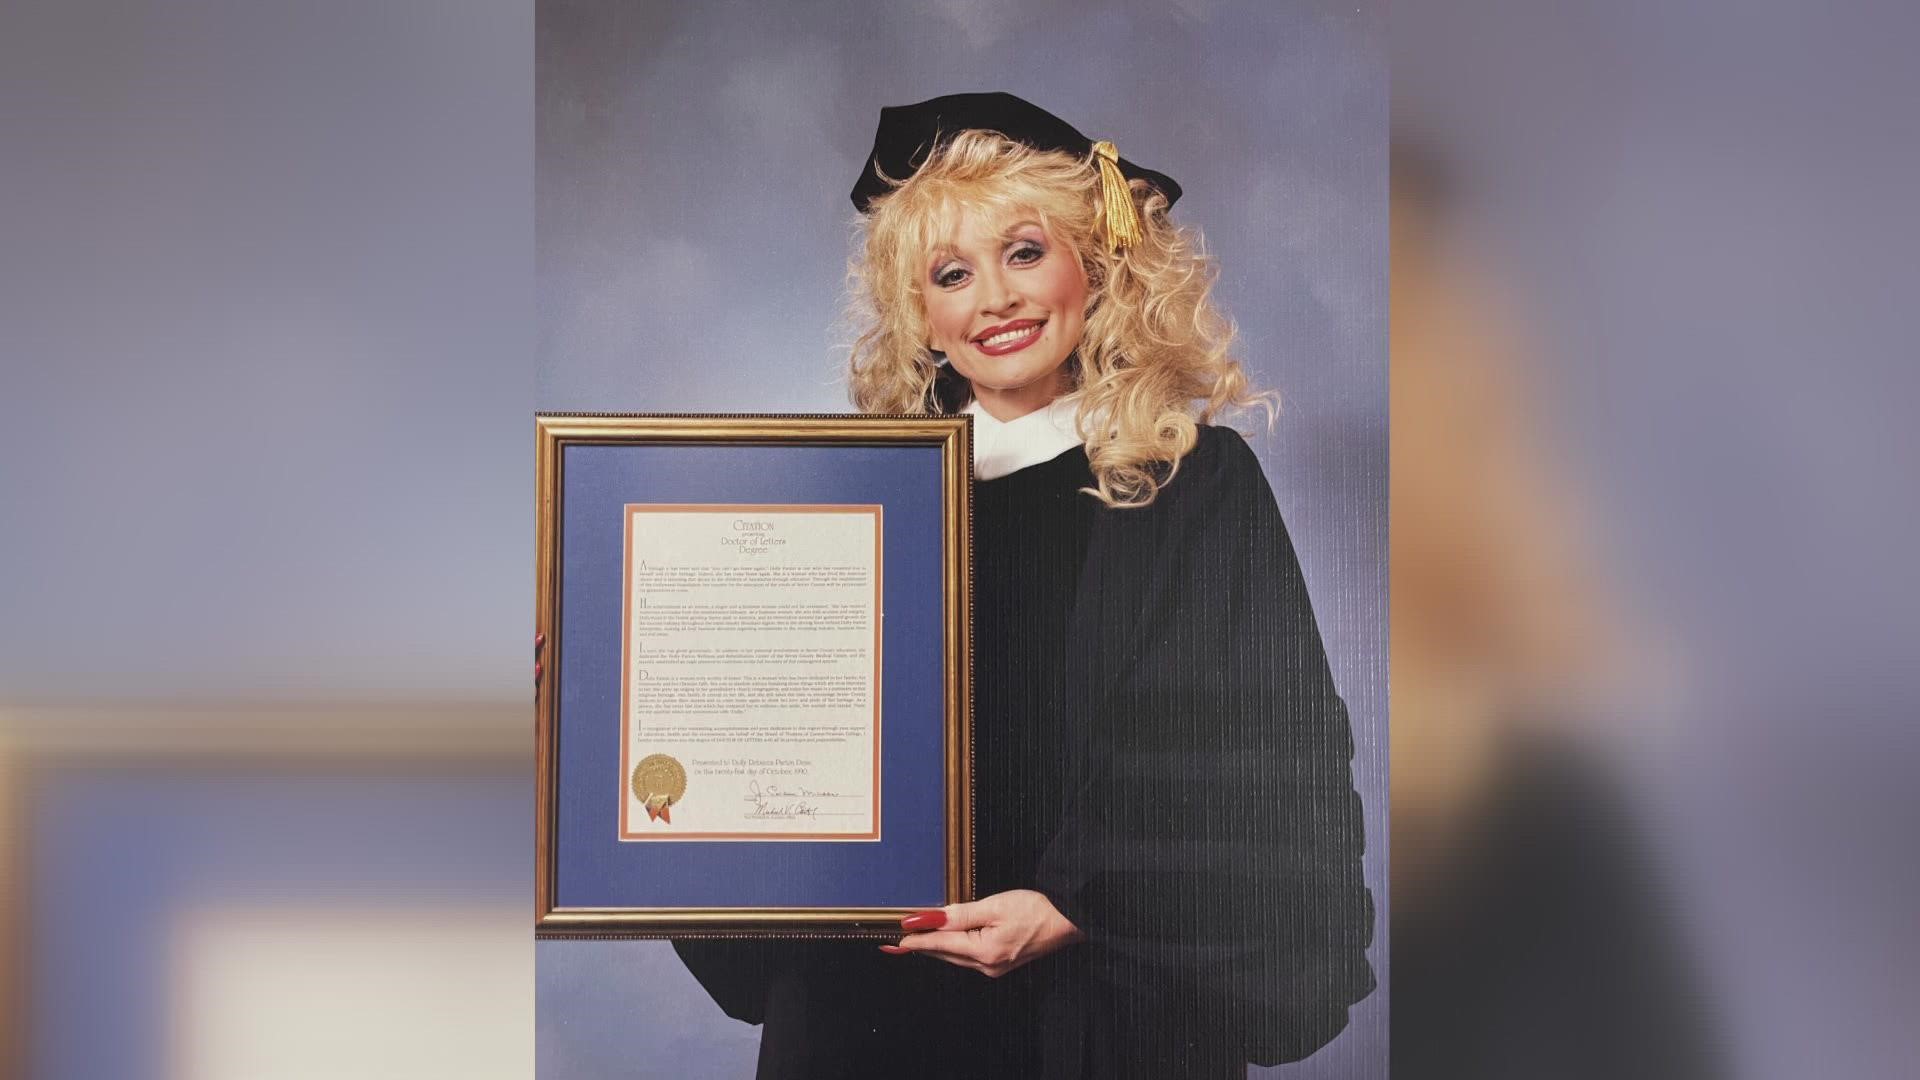 Did you also know that Dolly is a scholar? She received her degree in 1990. Carson Newman conferred upon Dolly a "Doctor of Letters Degree."